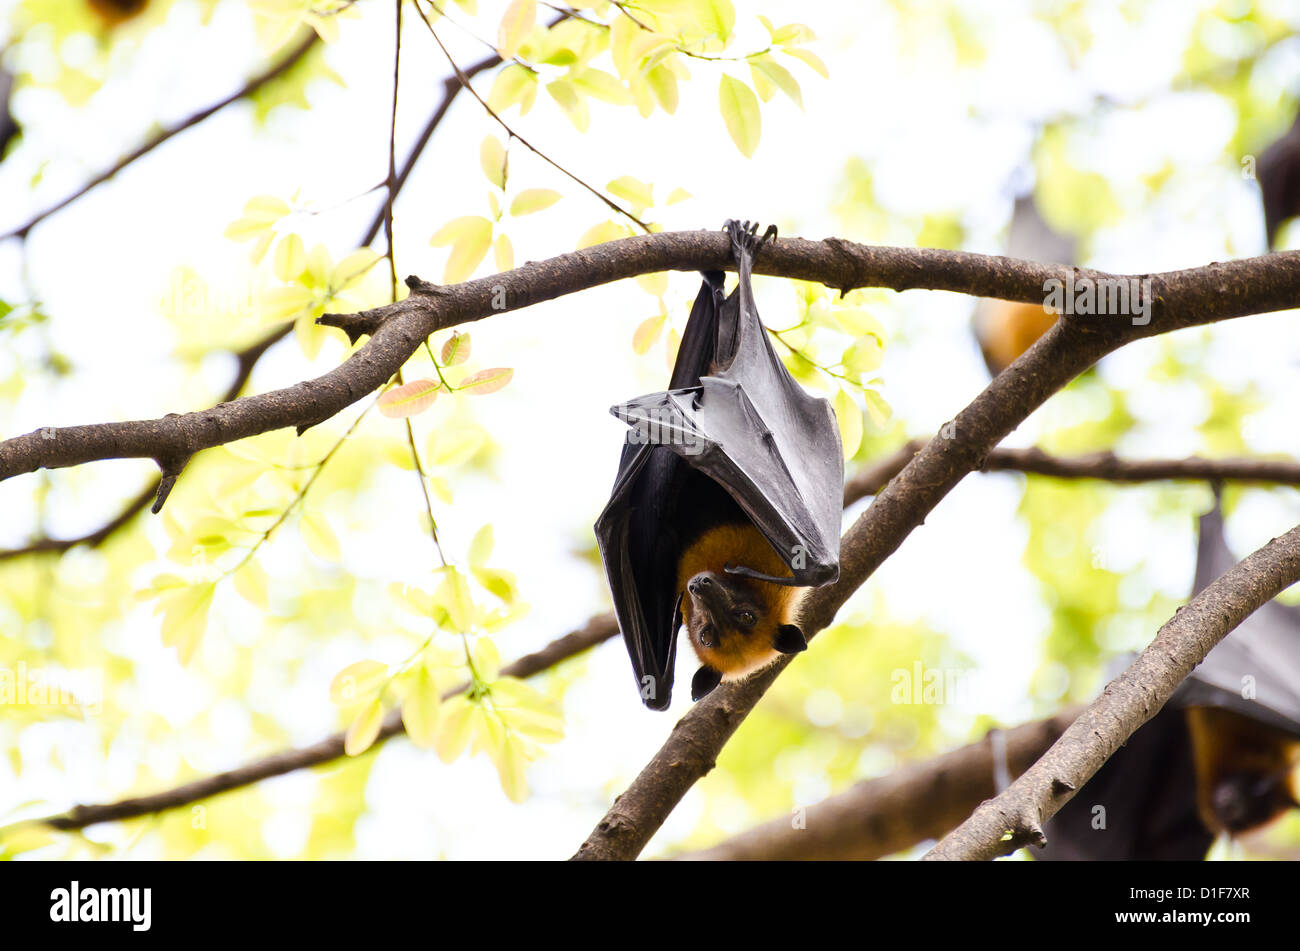 A giant bat hangs upside down from a tree. Stock Photo